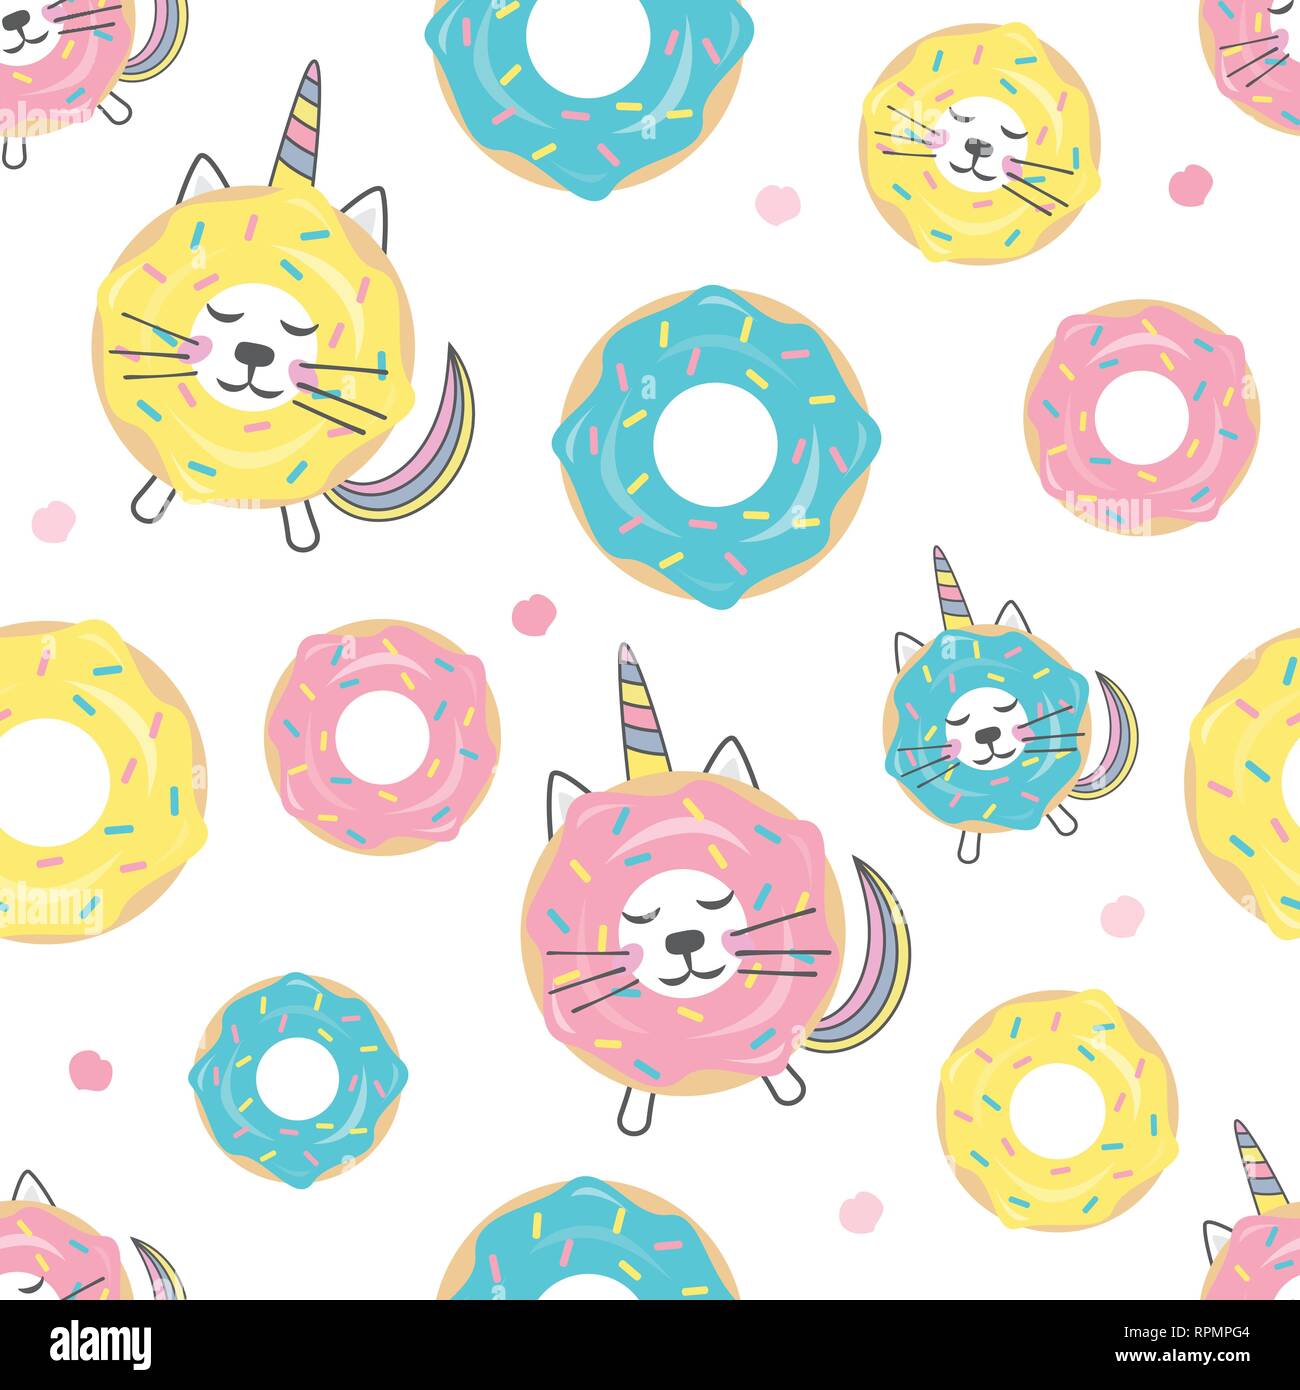 Childish seamless pattern with cute donut cat unicorn. Creative texture for textile, wallpaper, fabric, decor Stock Vector